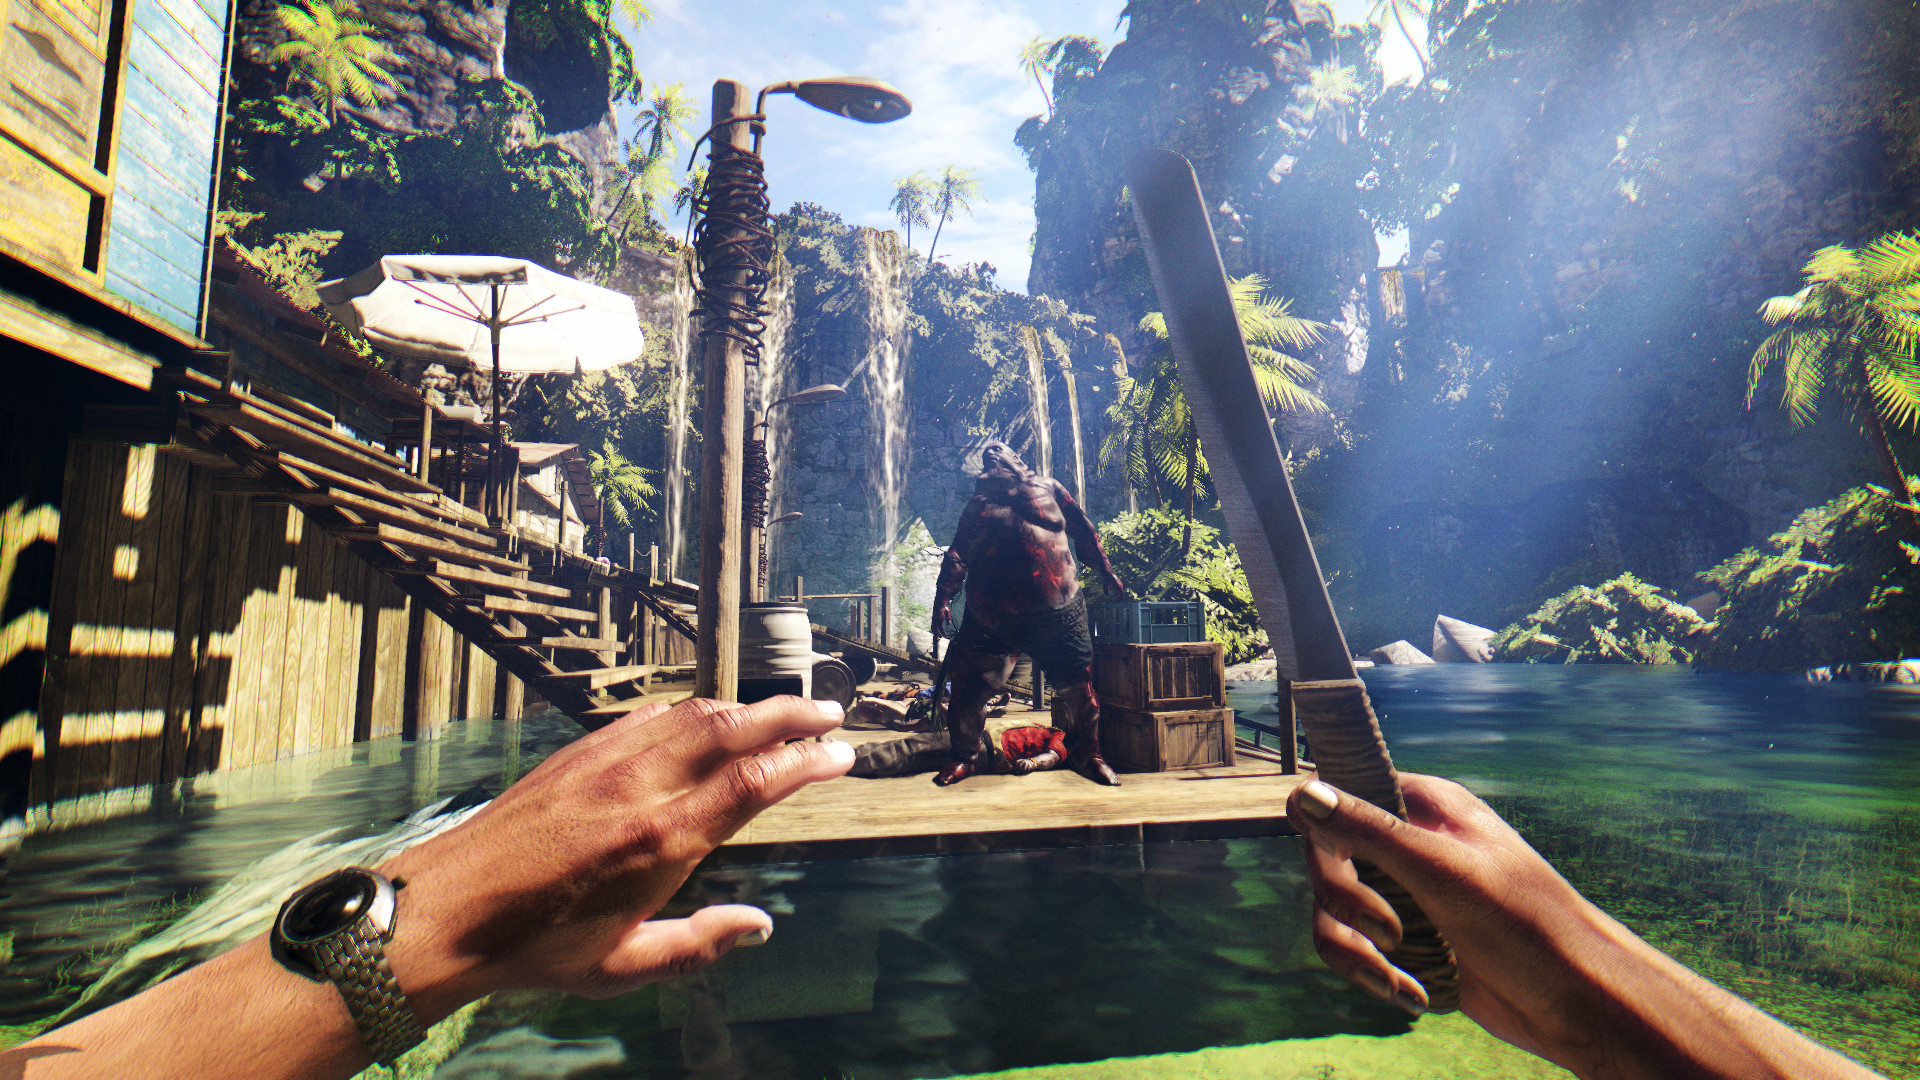 Dead Island 2 System Requirements - Can I Run It? - PCGameBenchmark